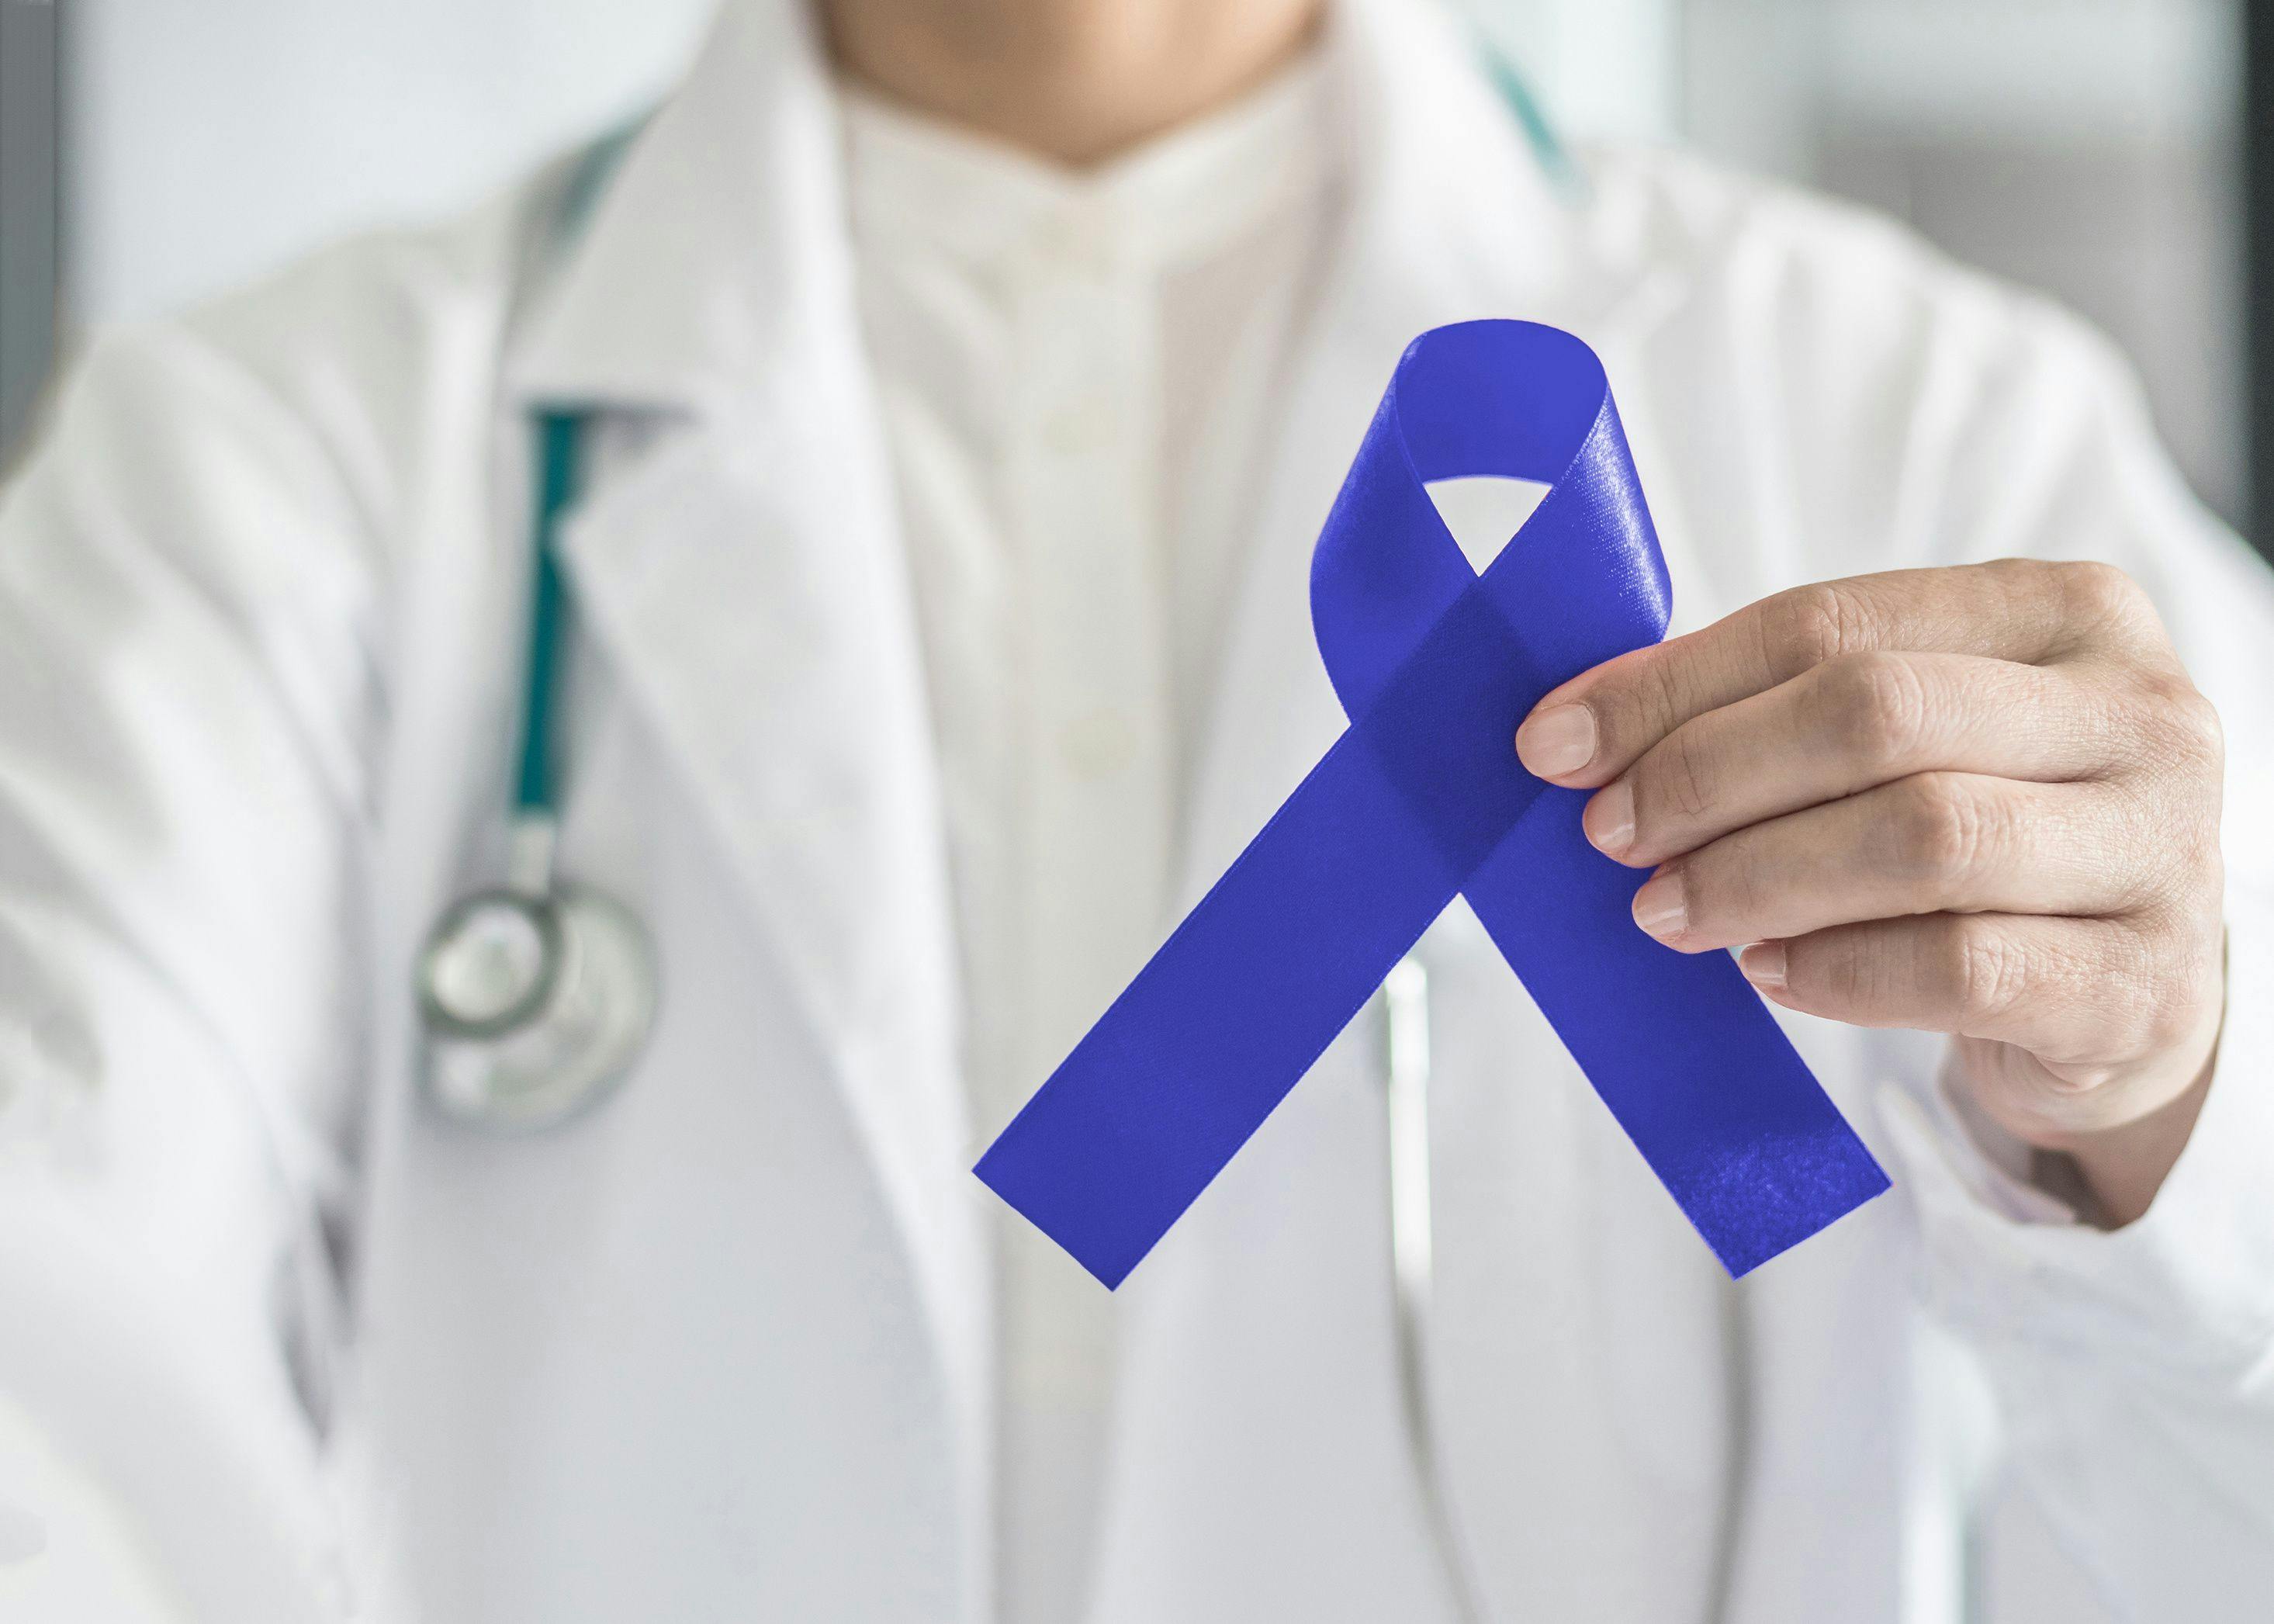 Dark blue ribbon for colon - colorectal cancer awareness on medical doctor's hand support | Image credit: Chinnapong - stock.adobe.com